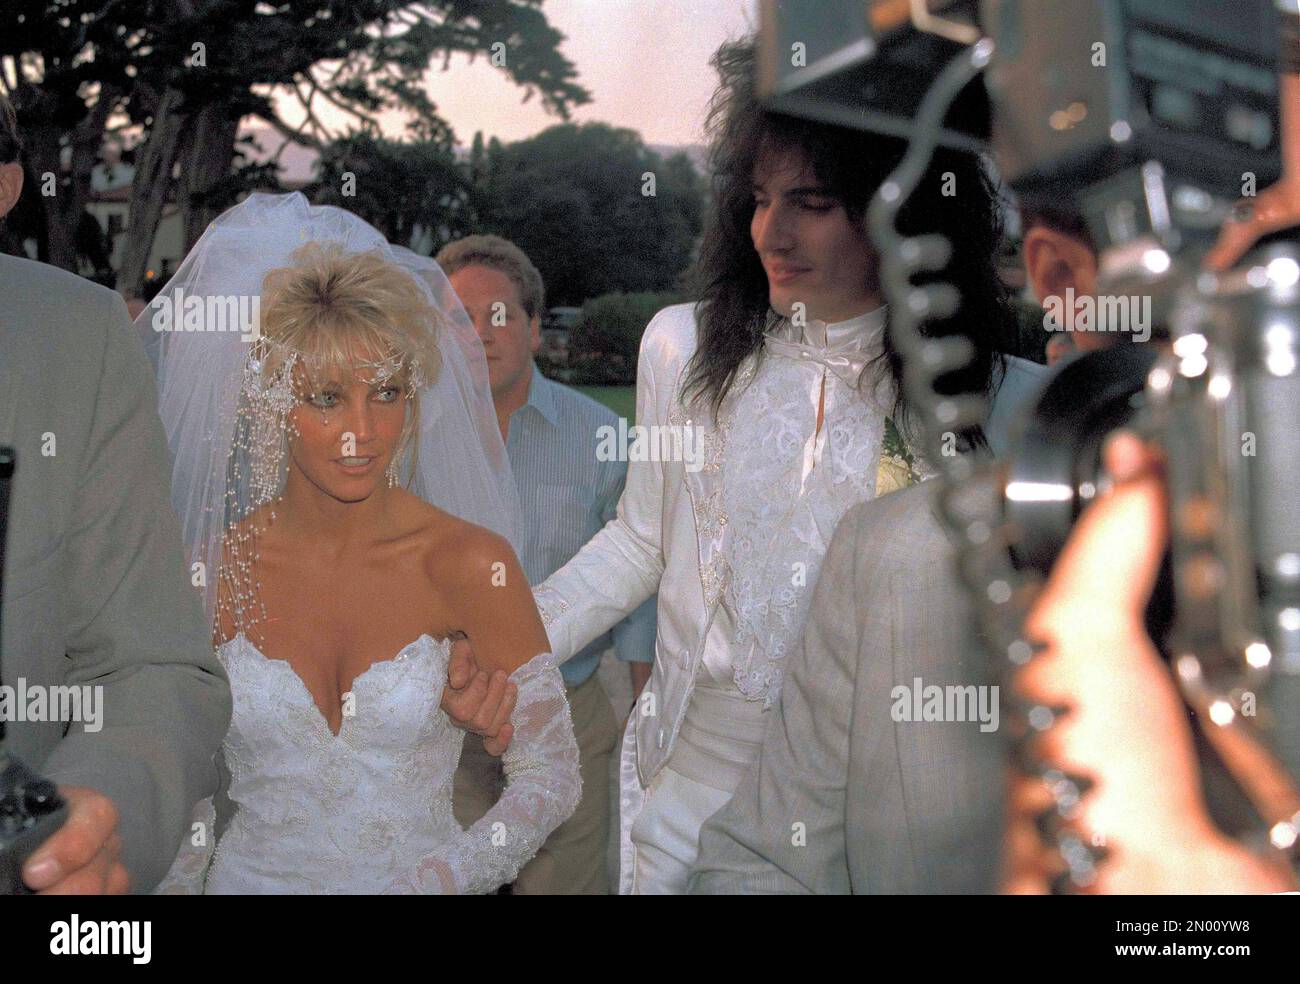 Actress Heather Locklear and rock drummer Tommy Lee of Mötley Crüe, leave  their wedding ceremony in Santa Barbara, Calif., May 10, 1986, en route to  the reception. Locklear is the co-star of